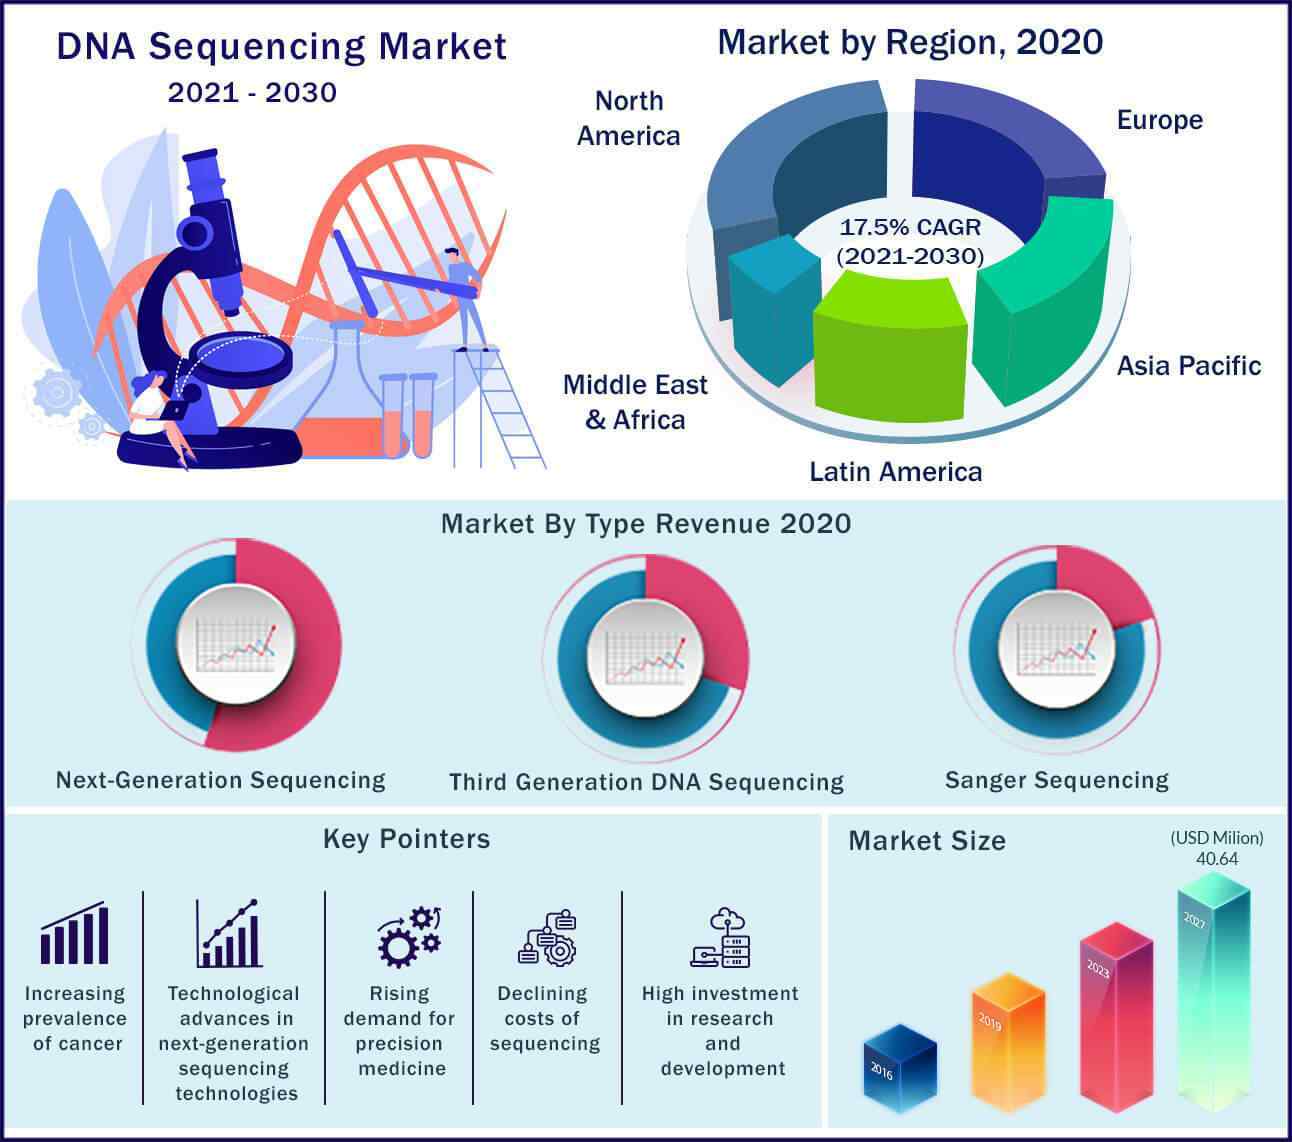 Global DNA Sequencing Market 2021 to 2030